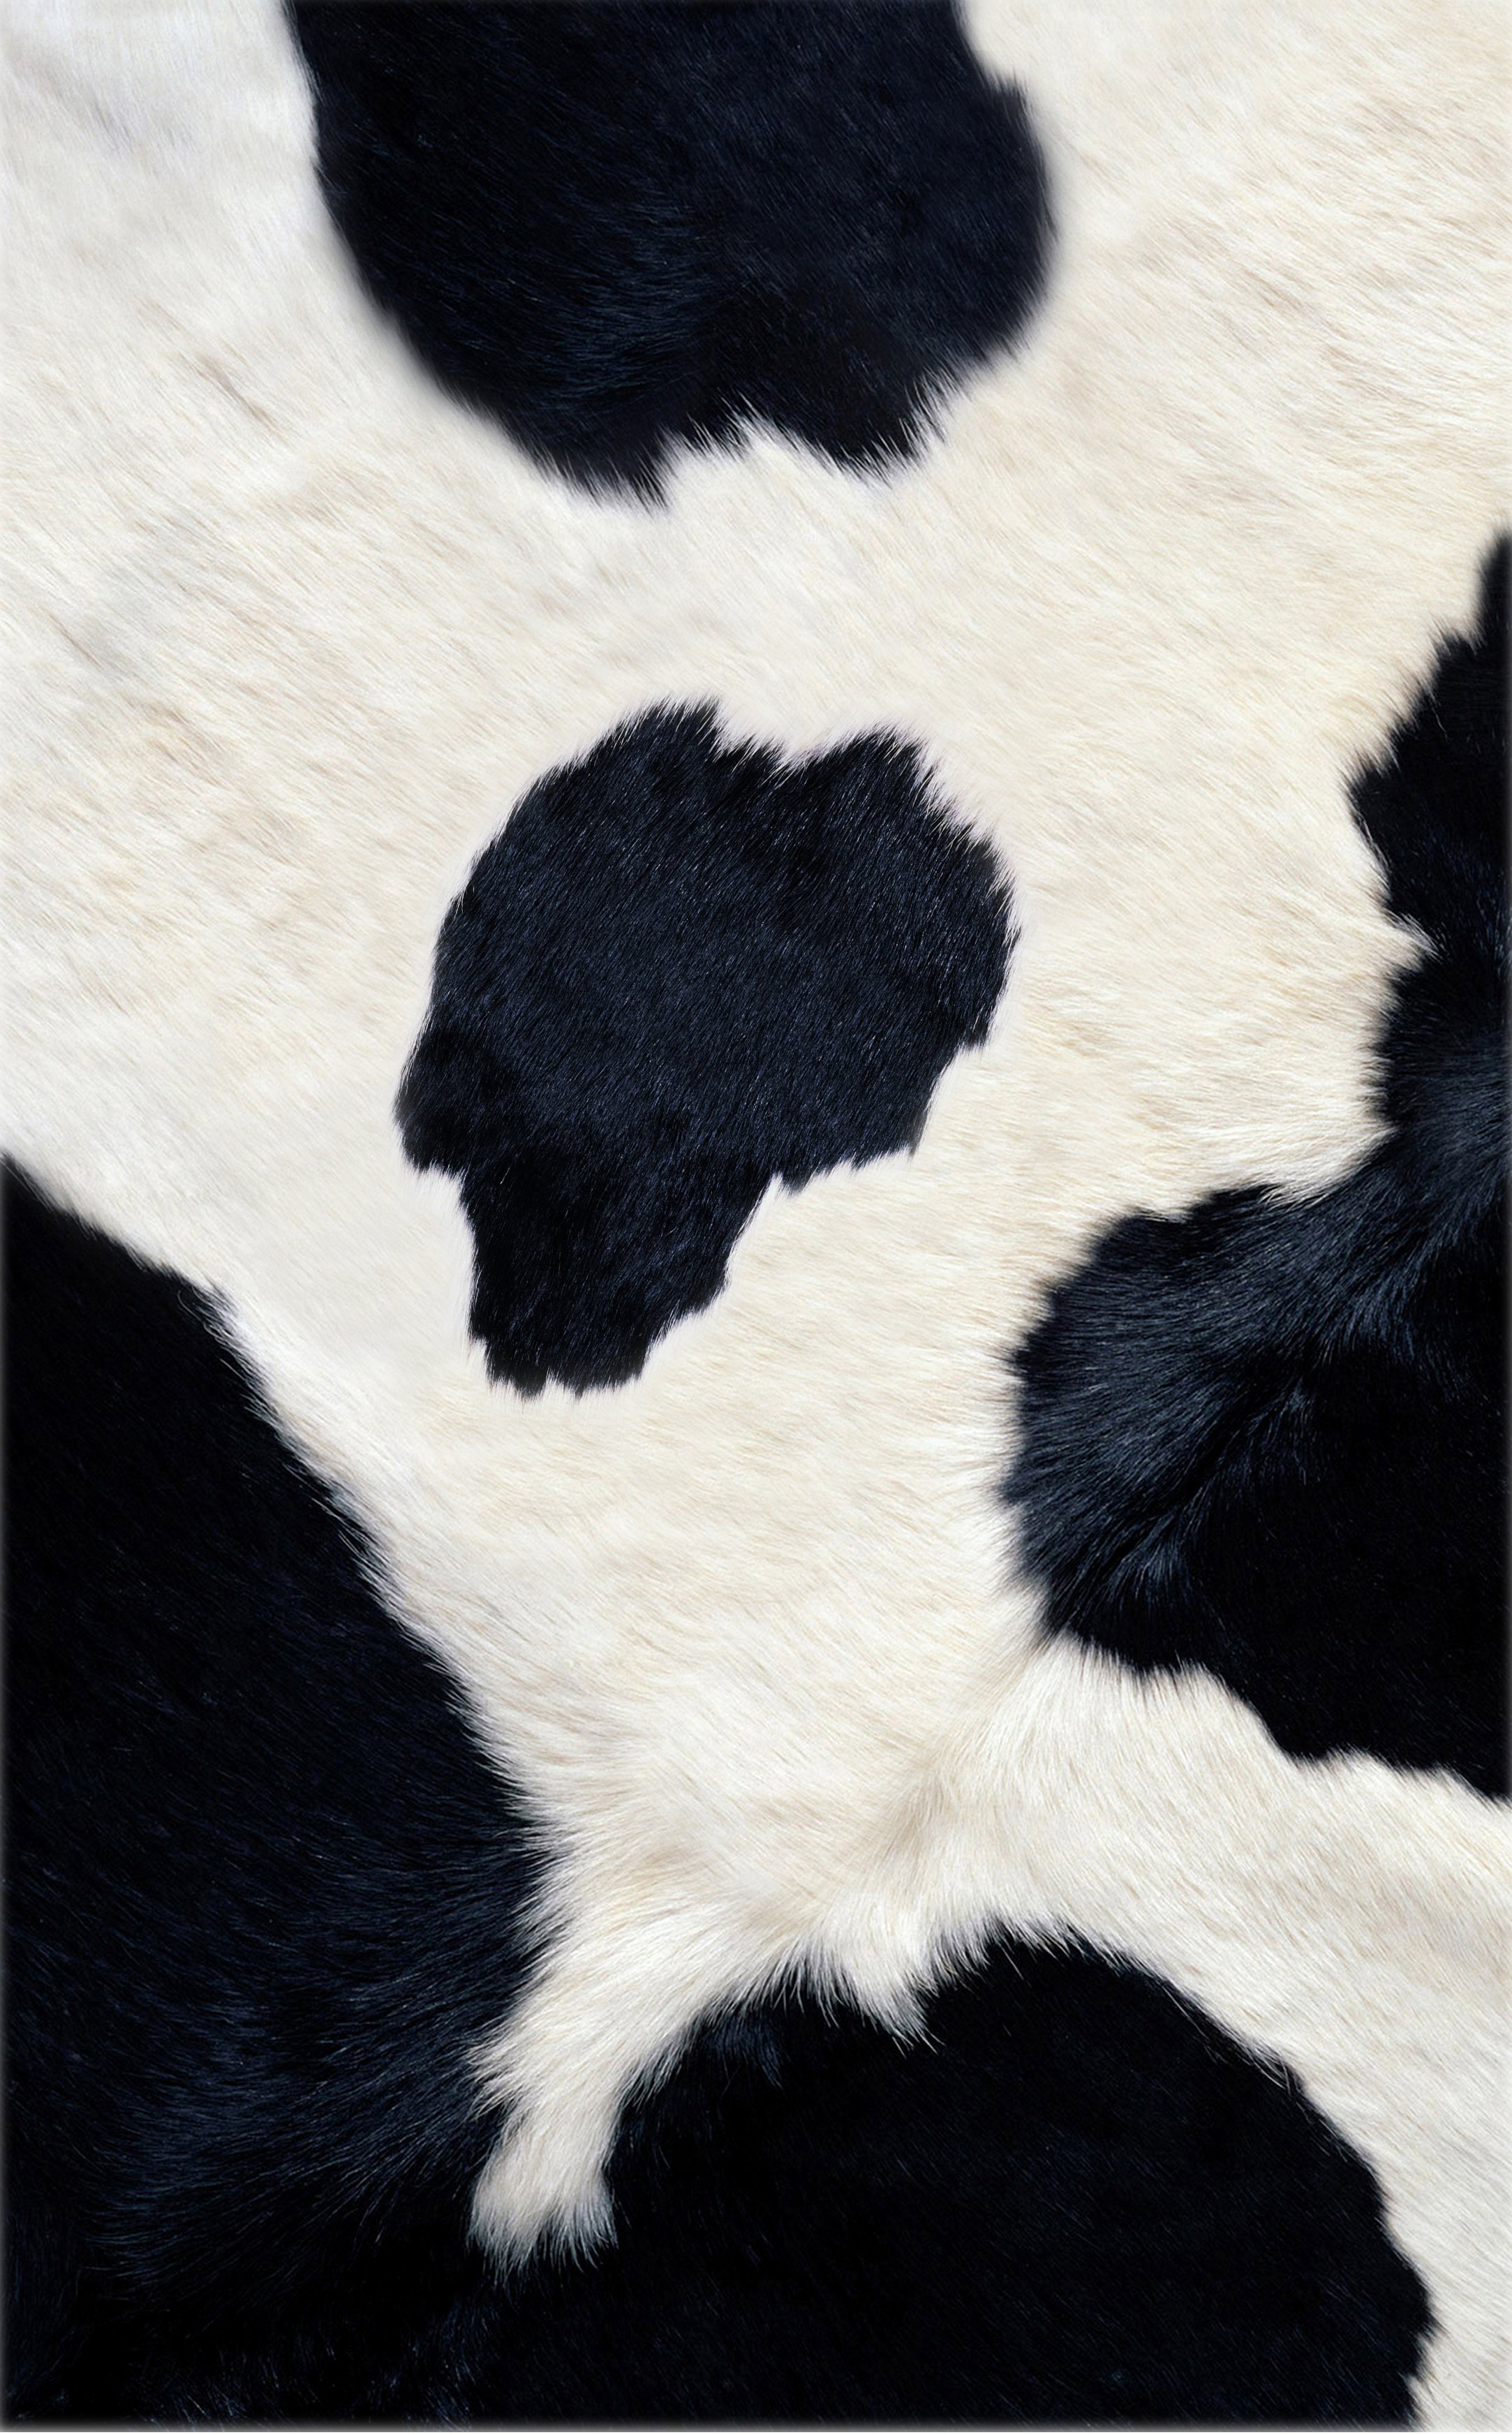 Seamless Texture of Cow Hide Wallpaper Skin of Cattle Stock Vector   Illustration of livestock fabric 134949767